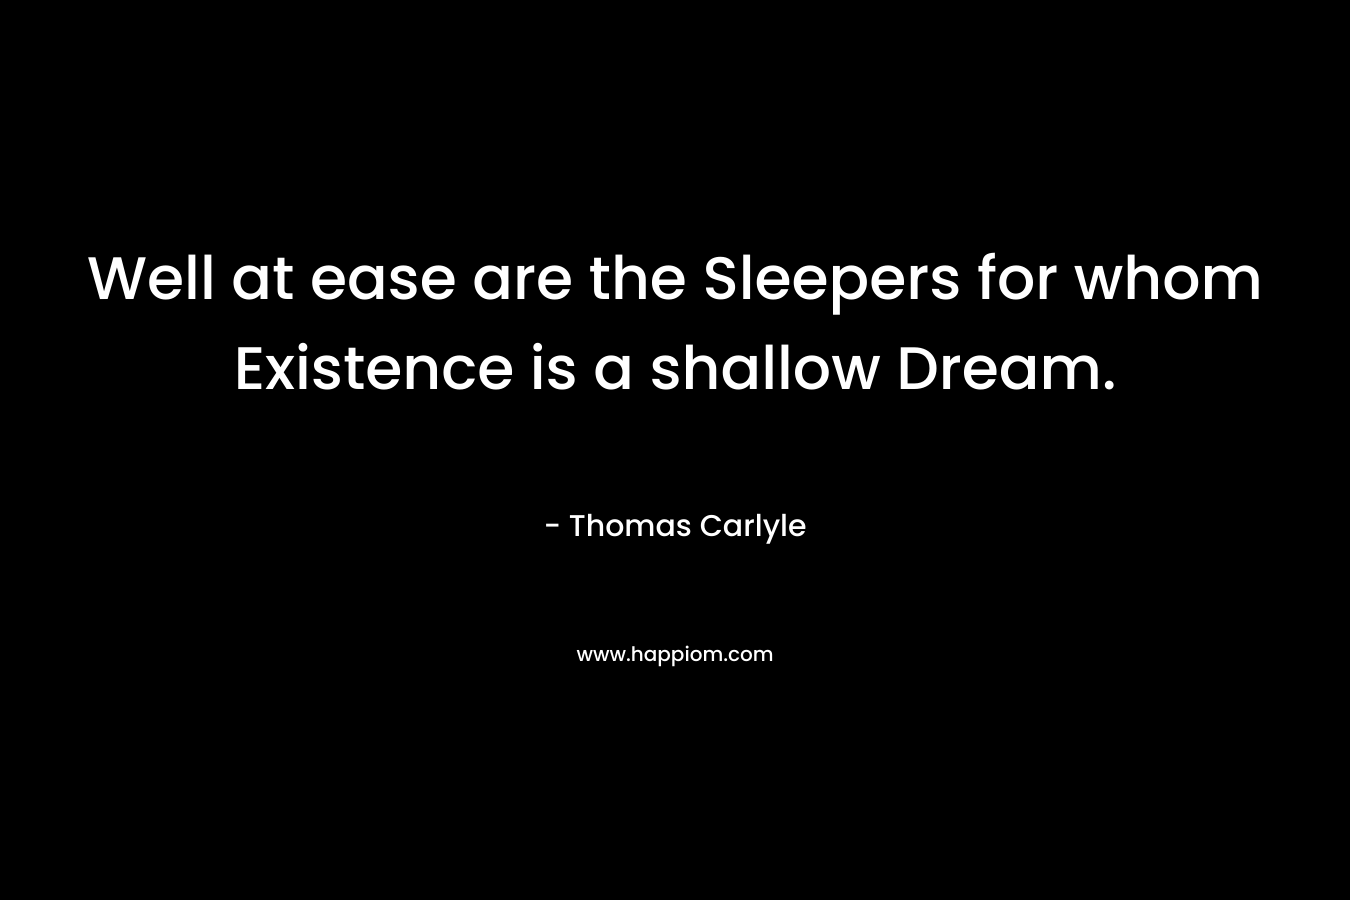 Well at ease are the Sleepers for whom Existence is a shallow Dream. – Thomas Carlyle